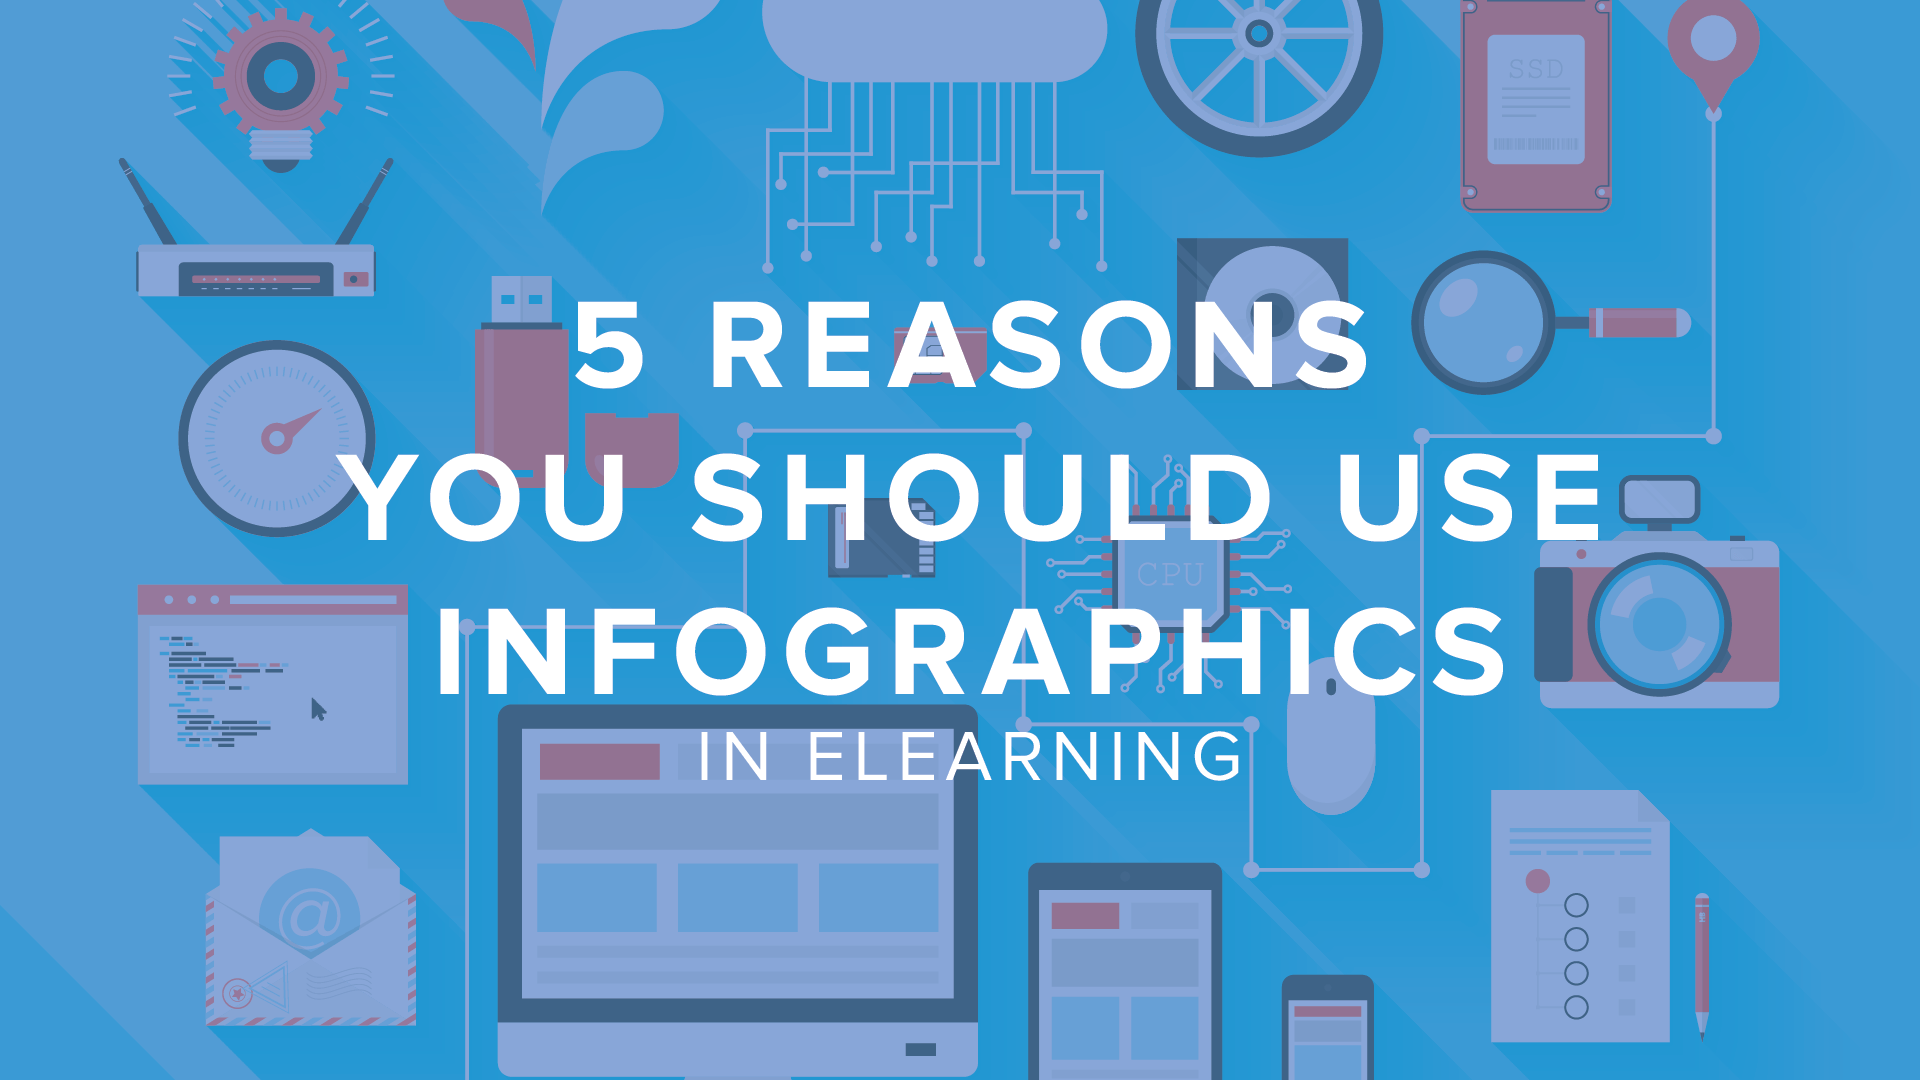 5 Reasons You Should Use Infographics in eLearning - DigitalChalk Blog thumbnail